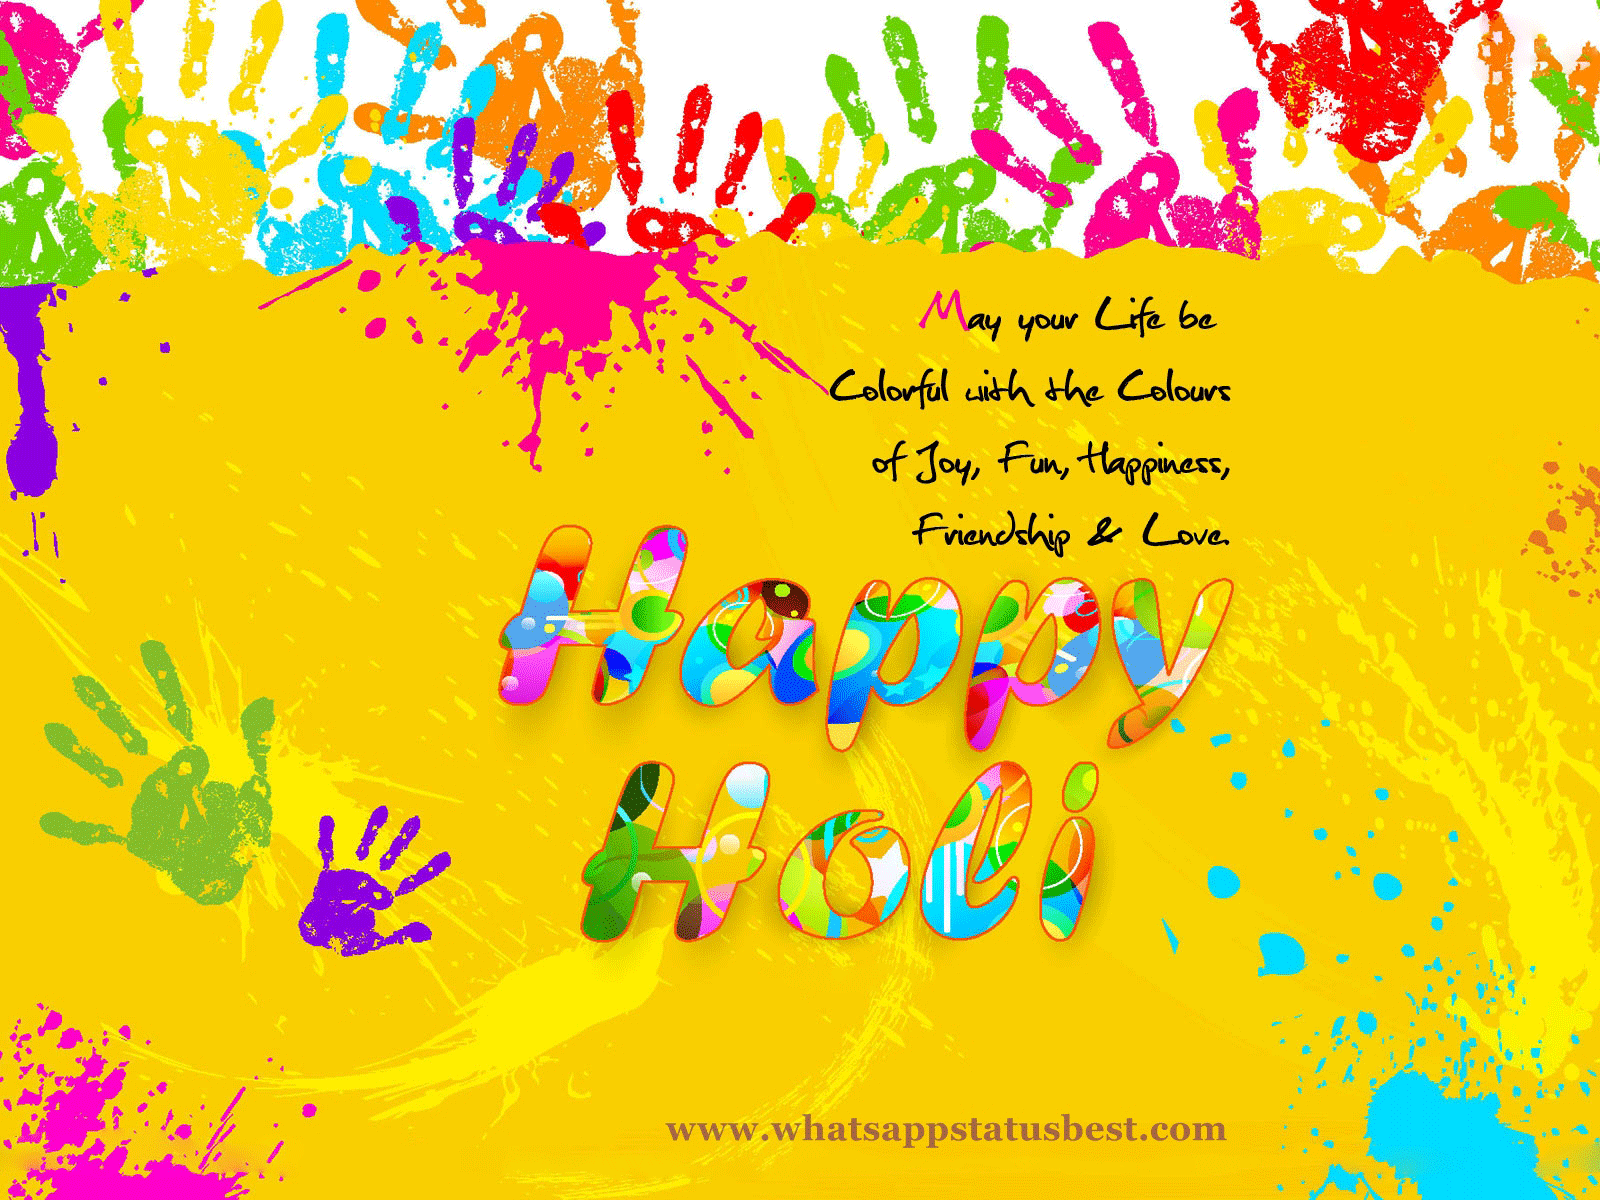 May Your Life Be Colorful With The Colors Of Joy, Fun, Happiness